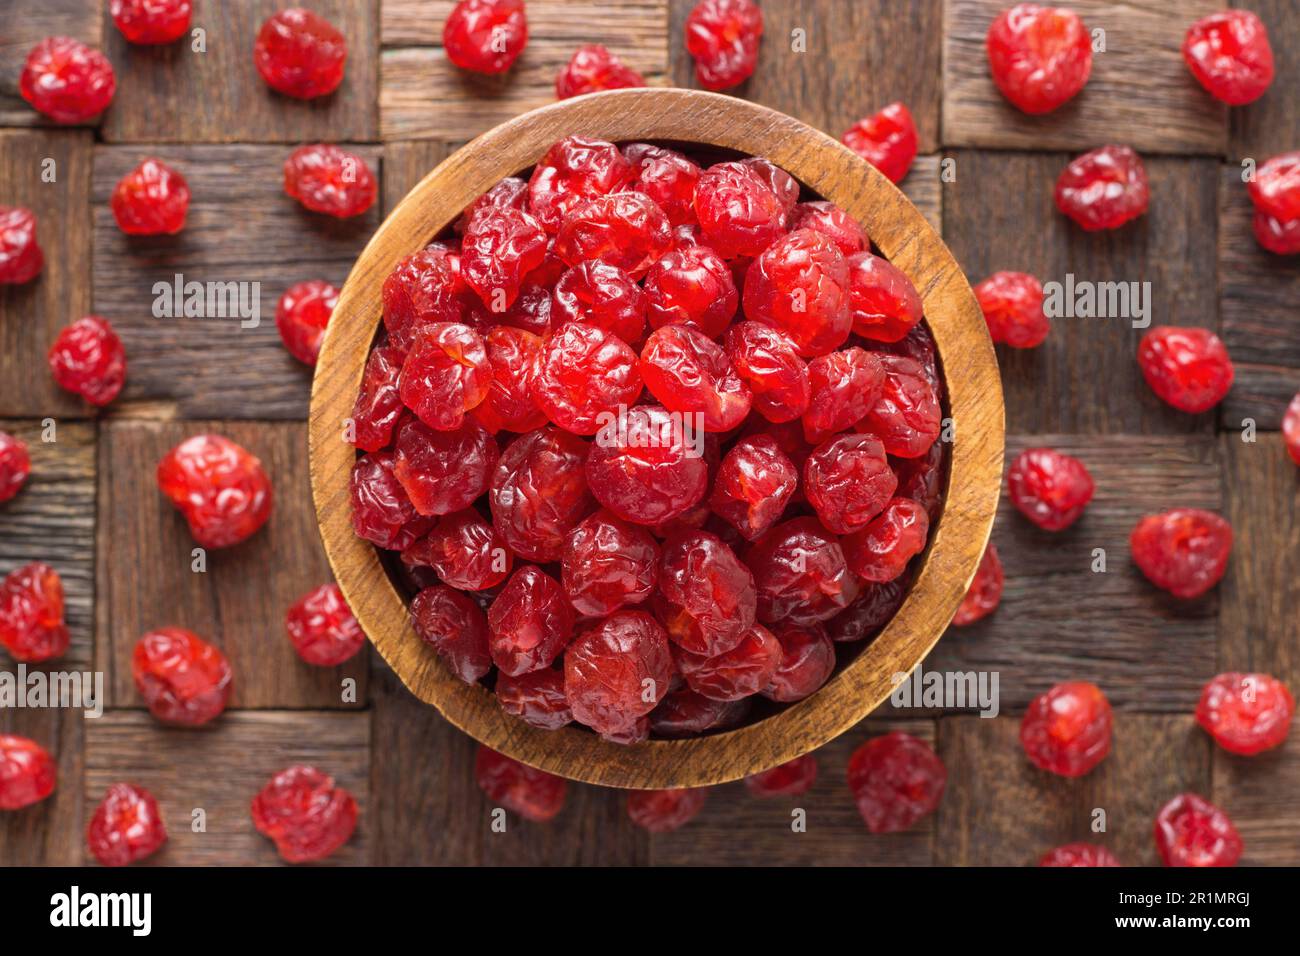 candied fruit, dried cherry with sugar in bowl on wooden table background. Stock Photo